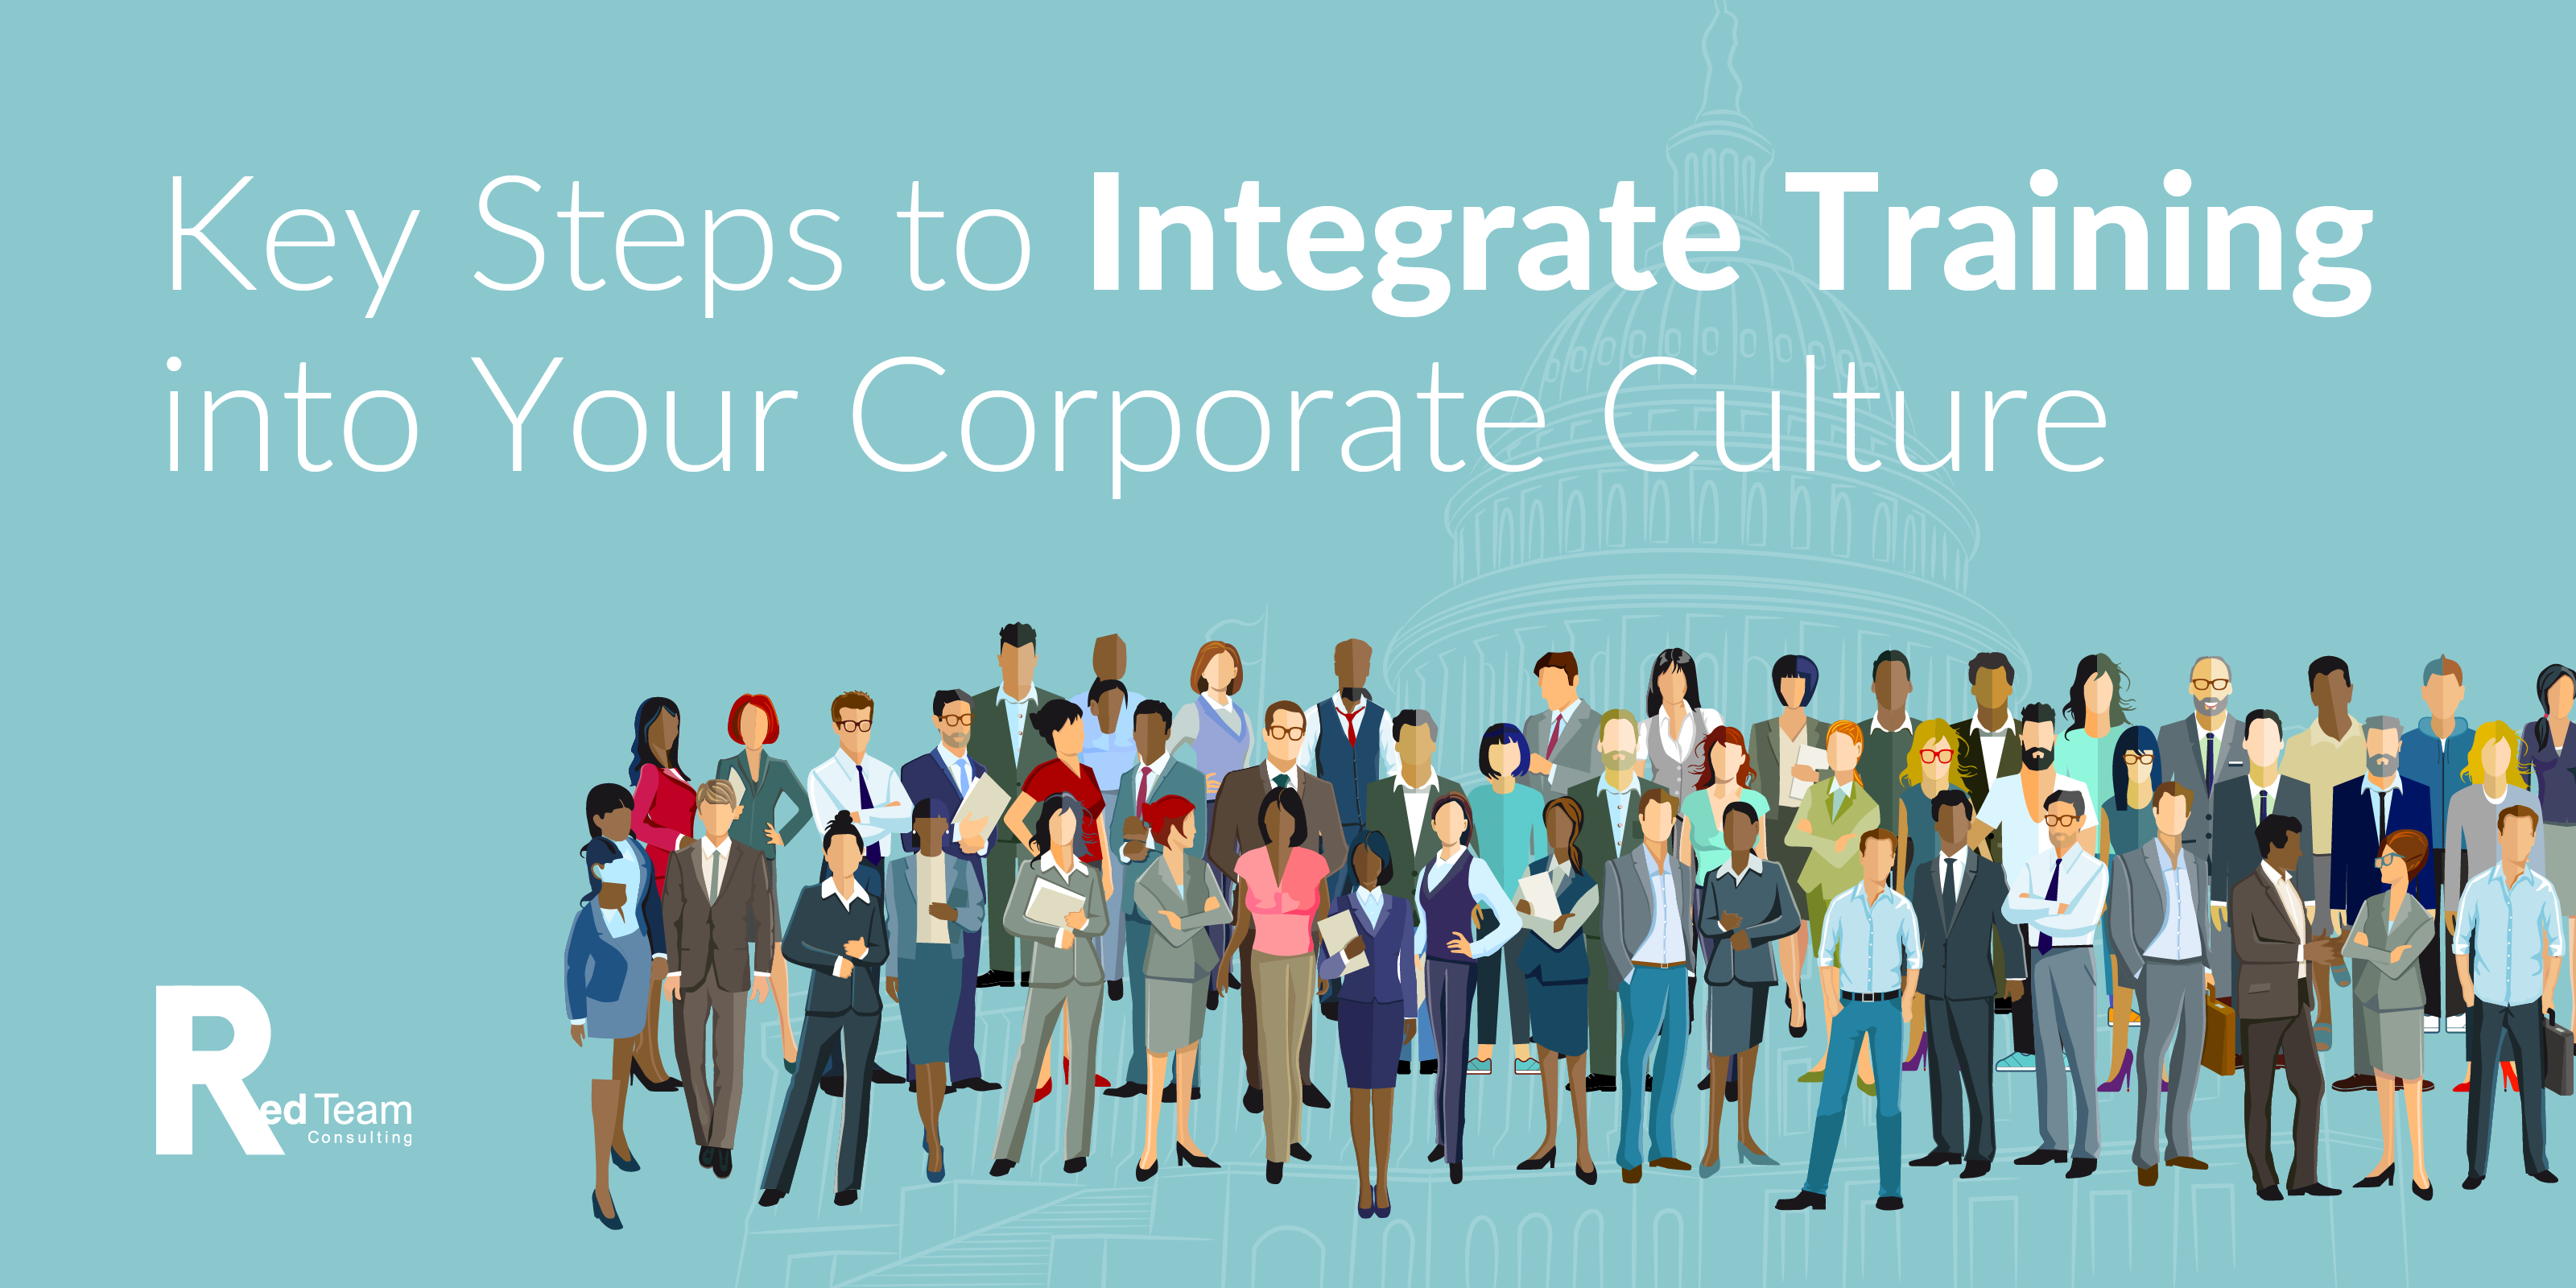 Key Steps to Integrate Training into Your Corporate Culture